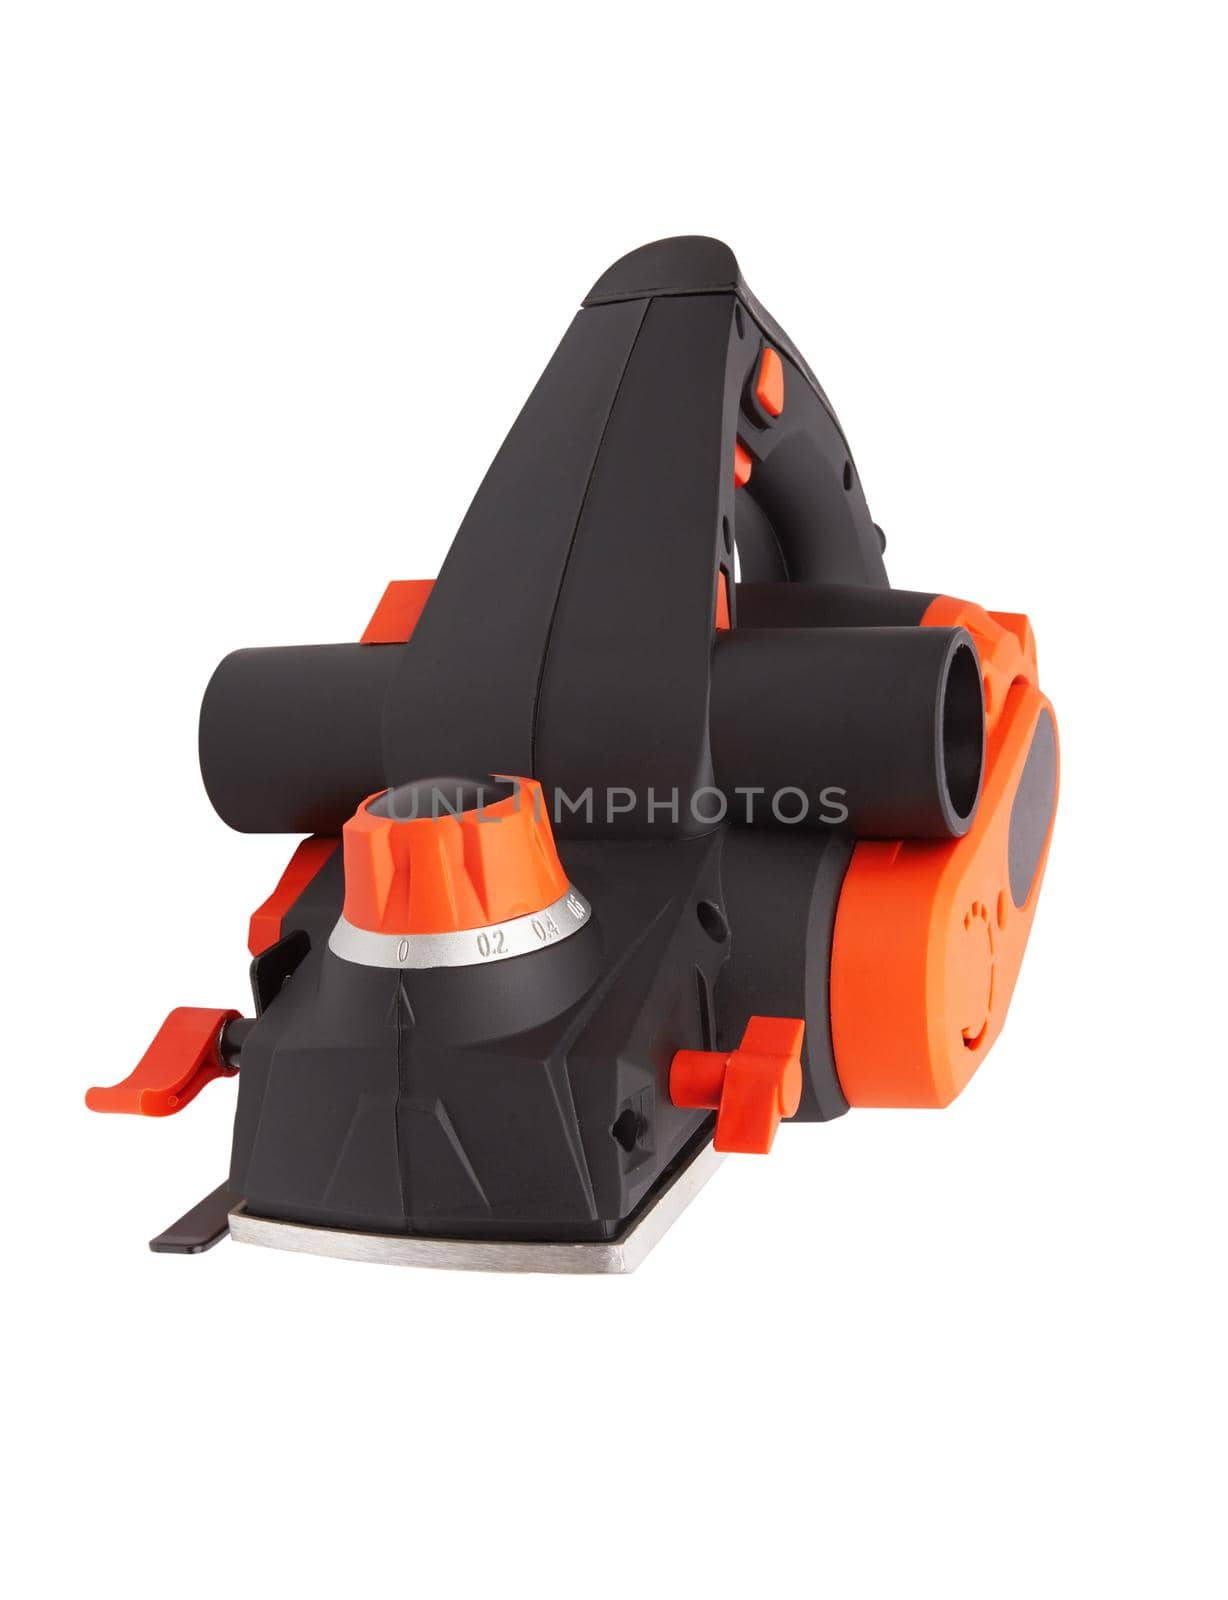 Powerful electric planer by pioneer111